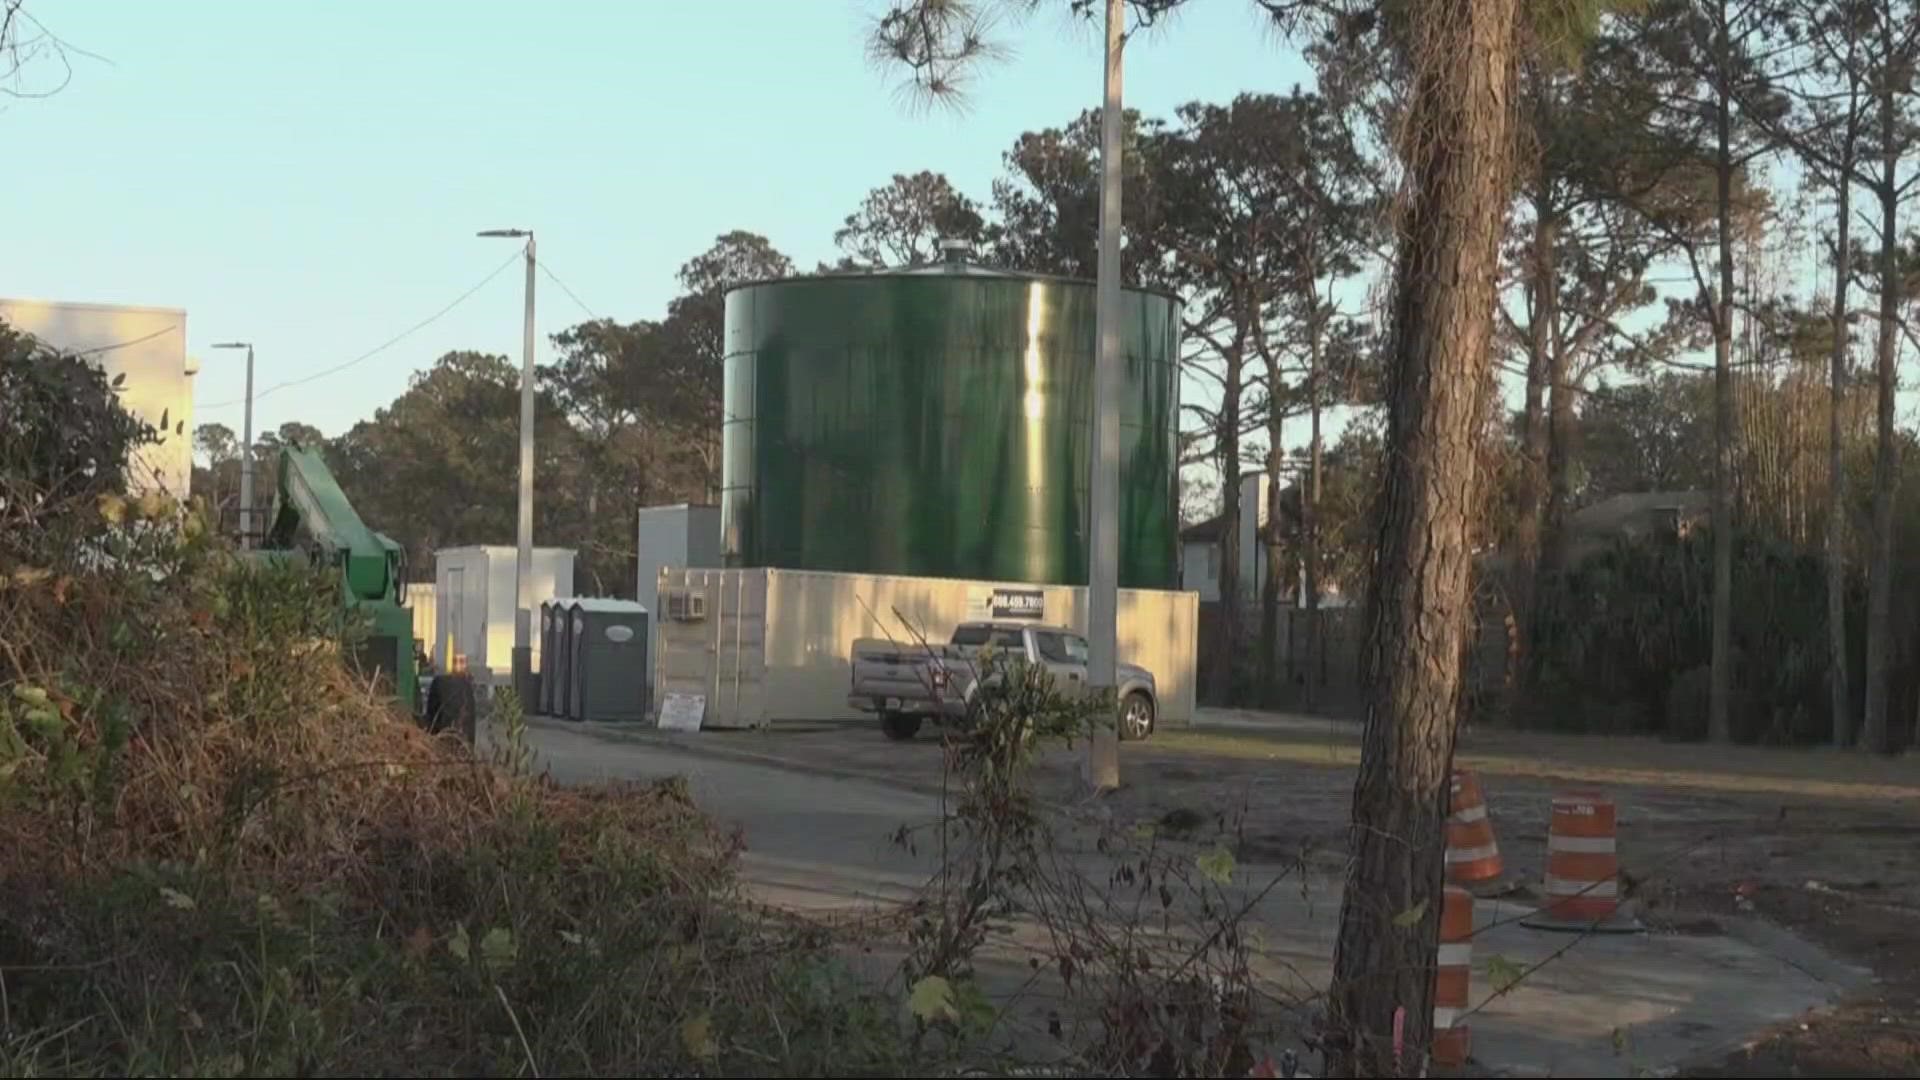 Residents say the water tank us an eyesore.